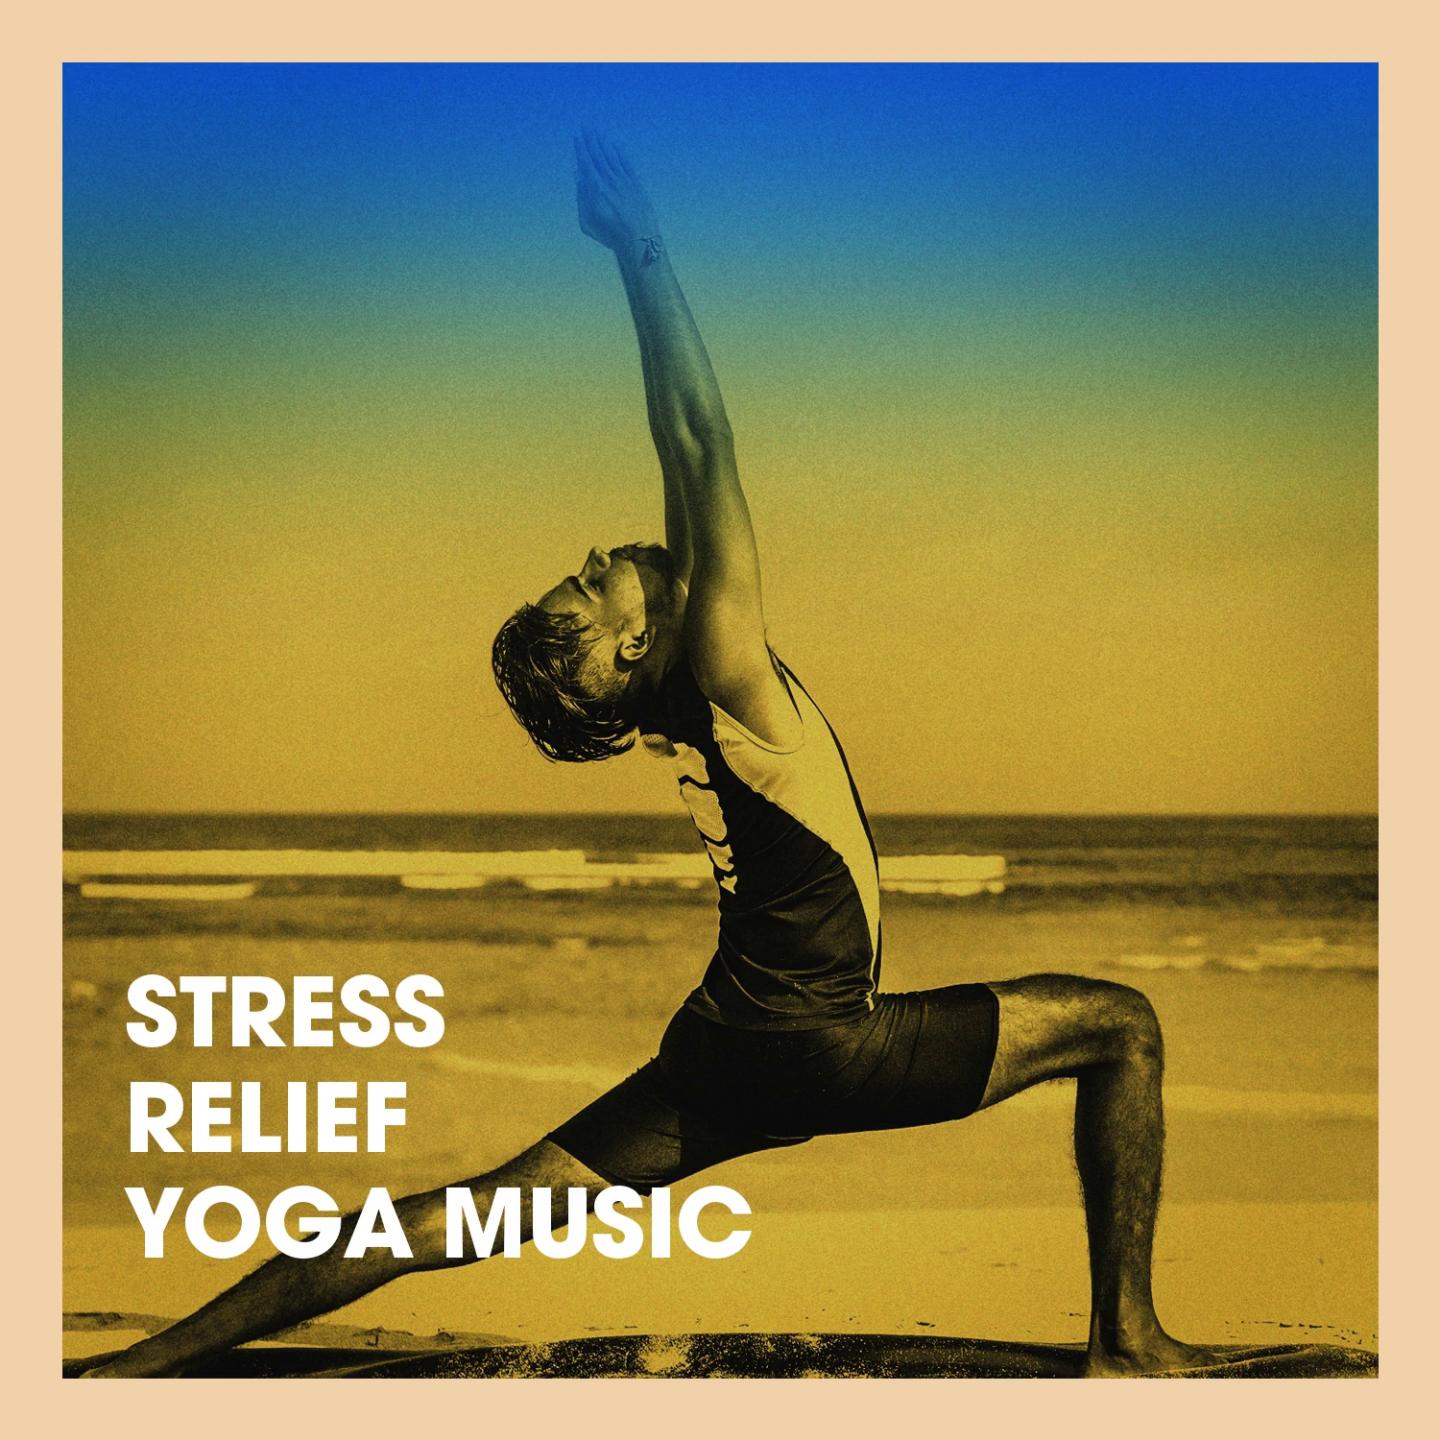 Stress relief yoga music